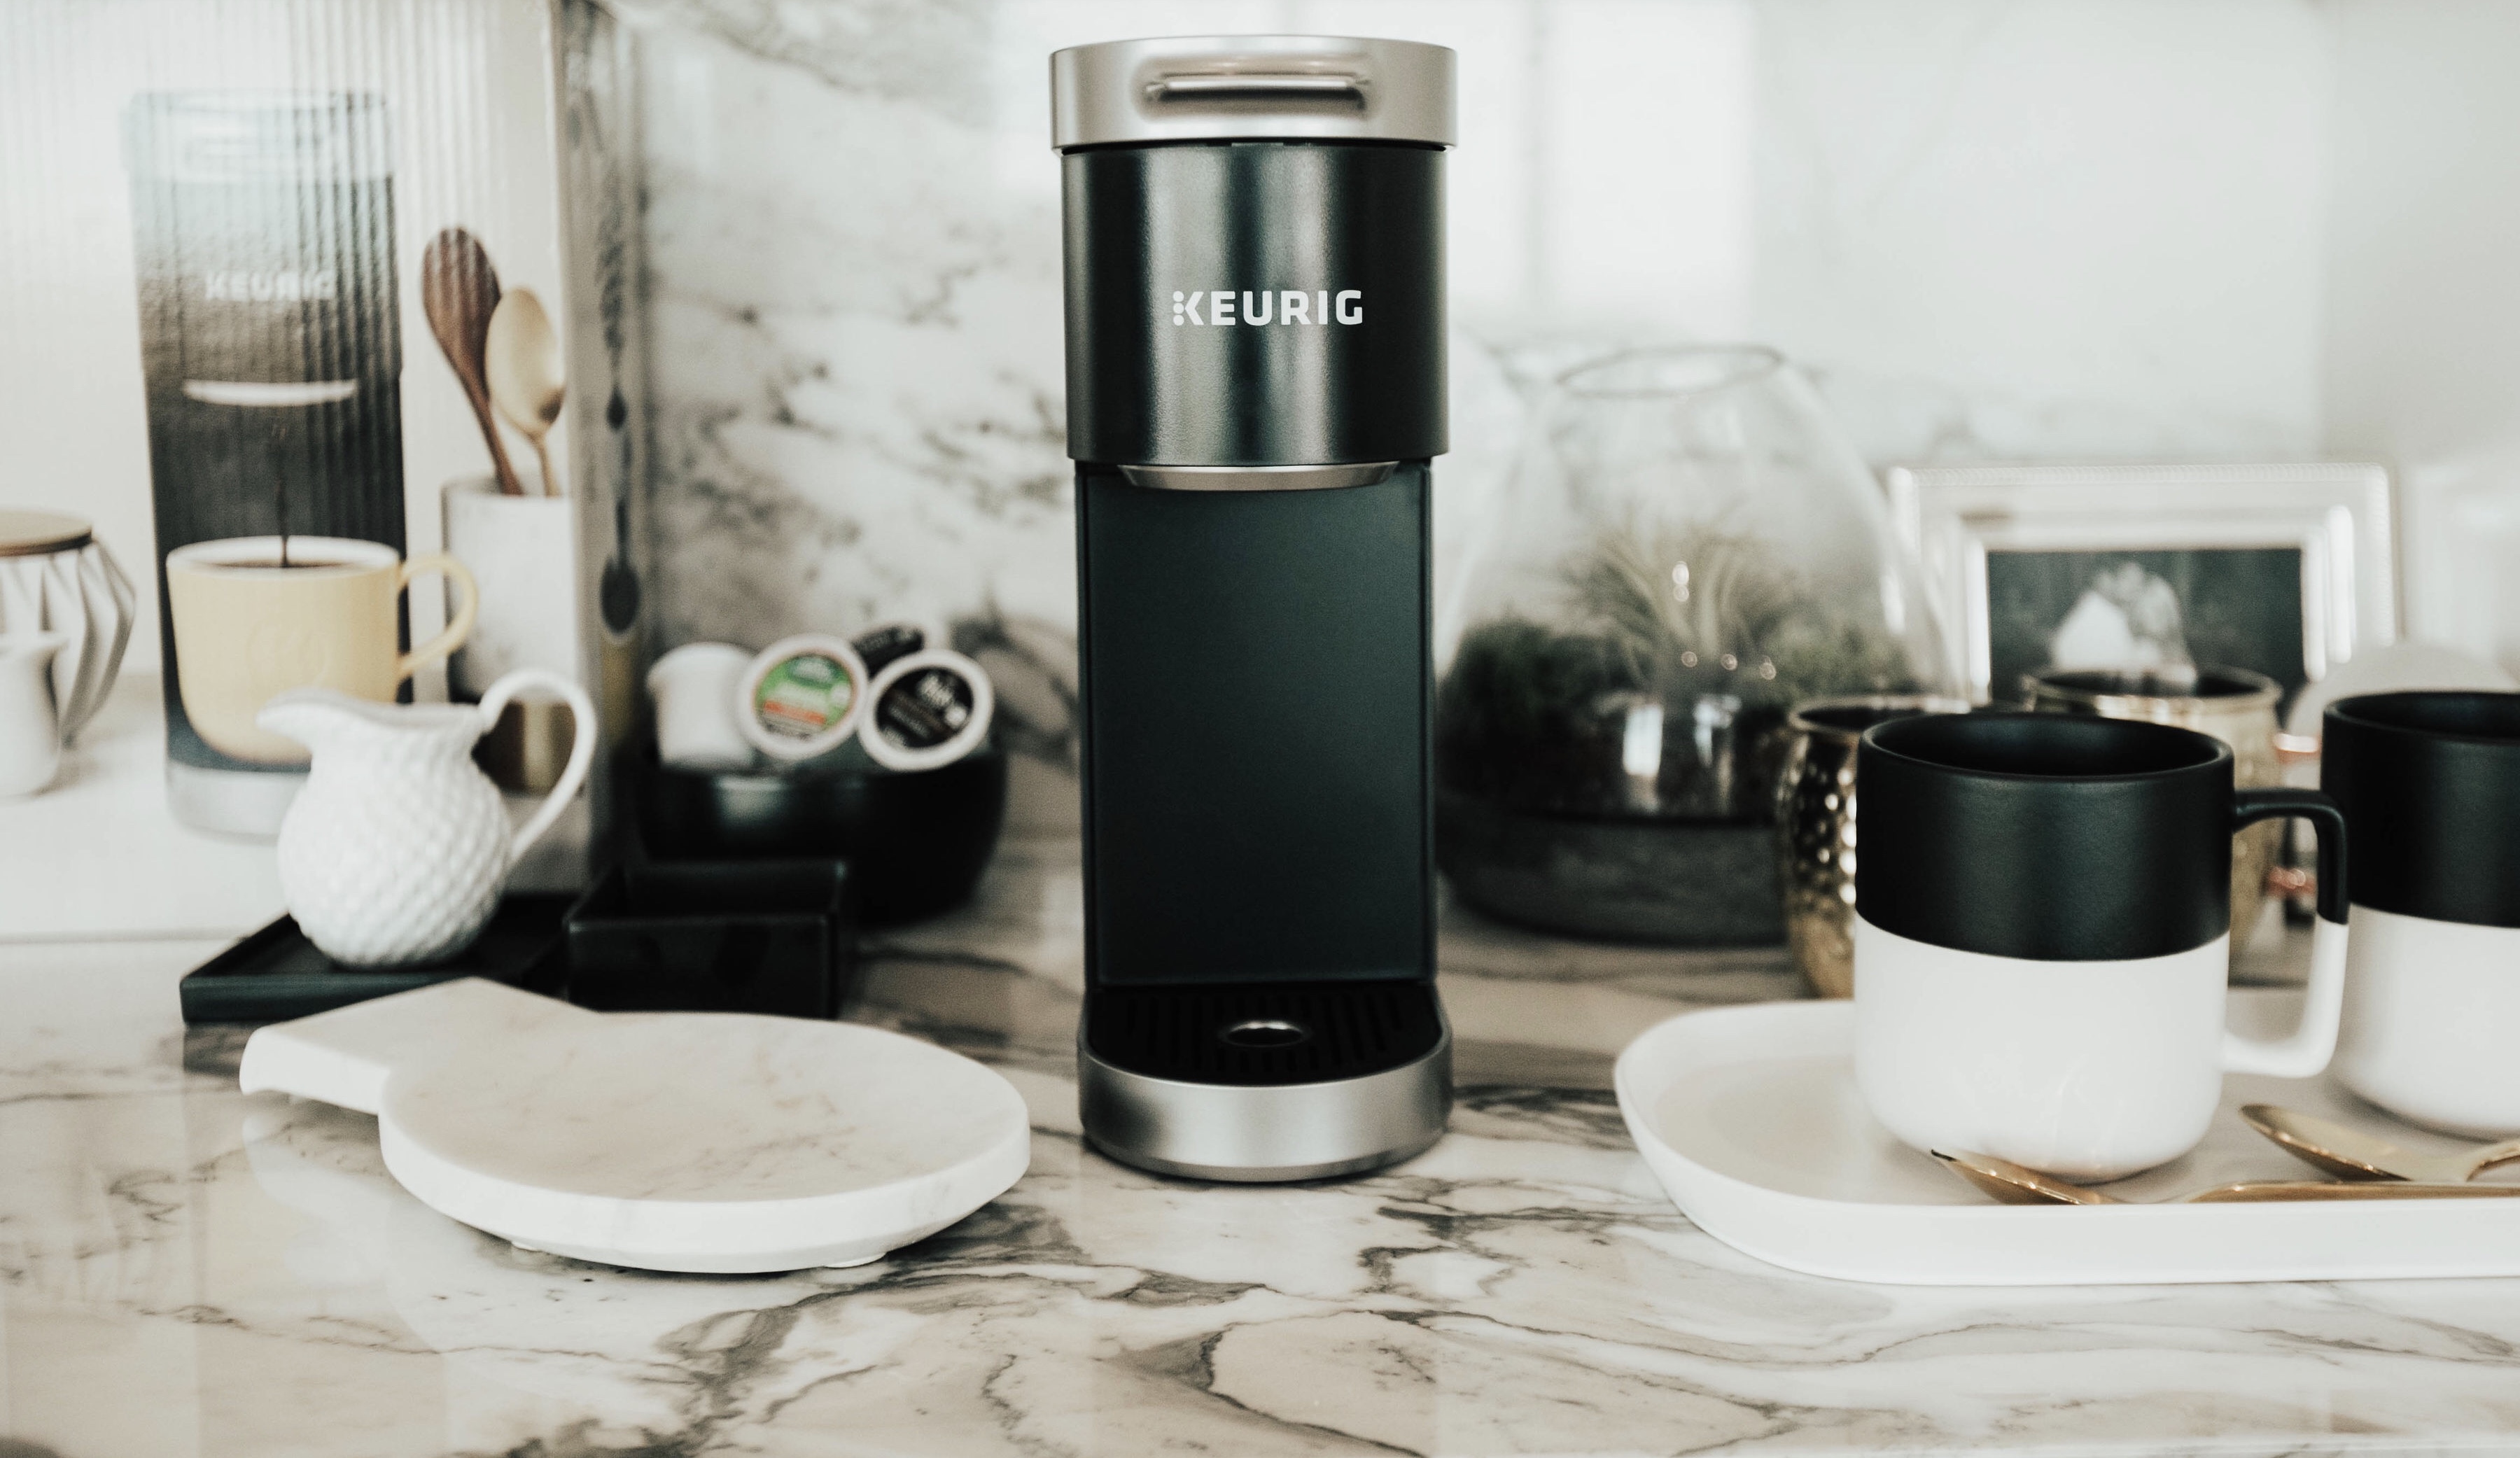 Emily Farren Wieczorek of Two Peas in a Prada shares her favorite coffee maker from Querig available on MEGA sale right now at QVC.